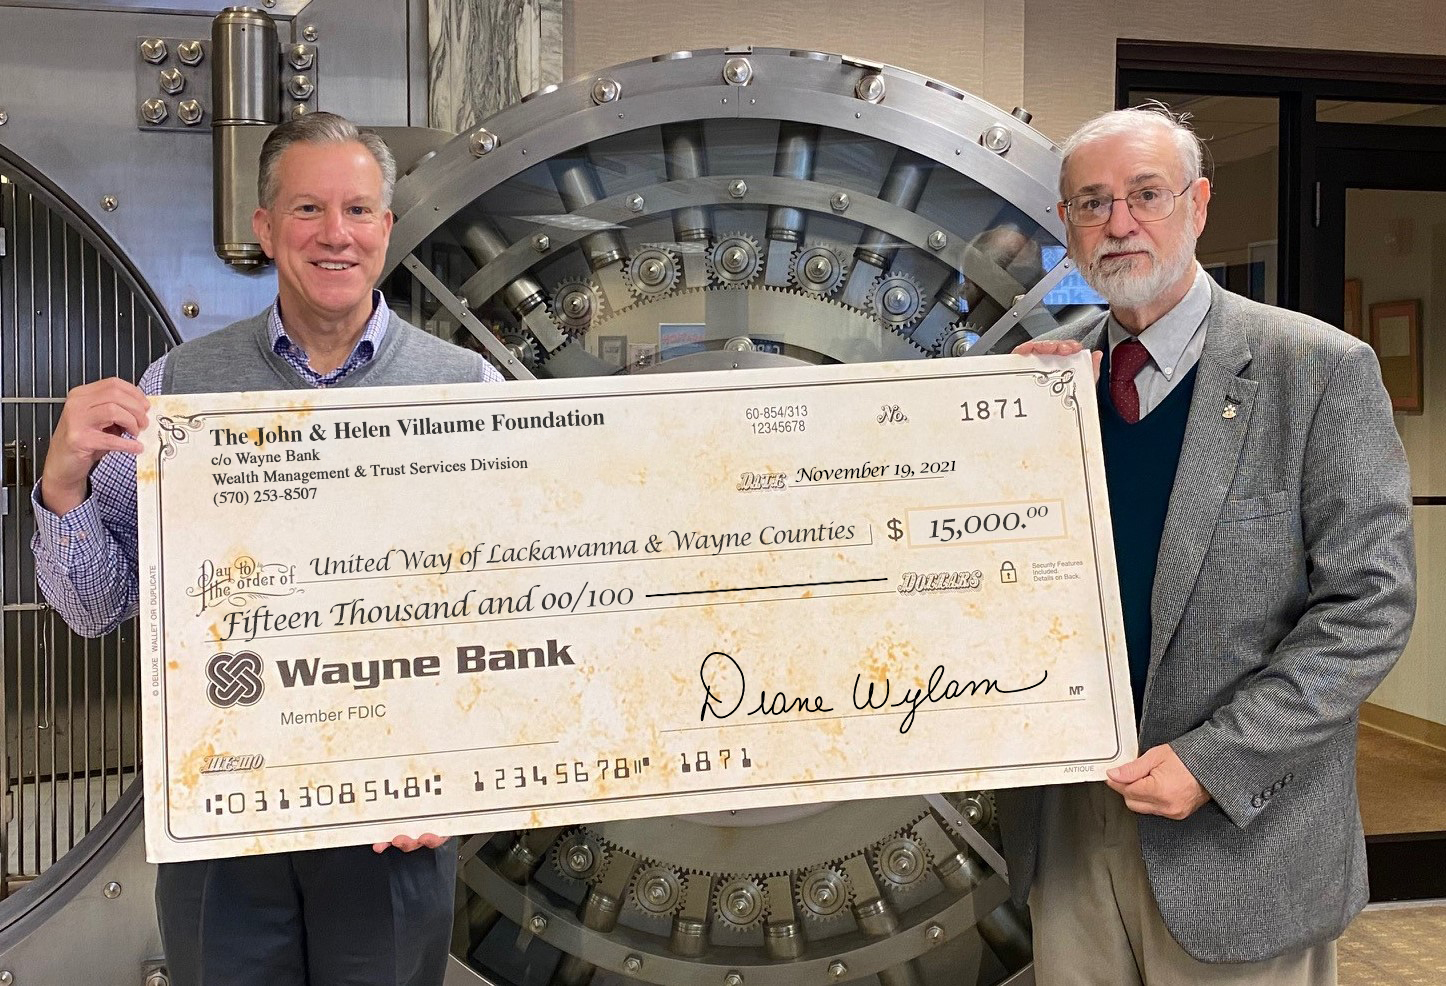 PHOTO CAPTION-LEFT TO RIGHT: Lewis J. Critelli, Villaume Foundation board member, and William Cockerill, AFL-CIO Community Services Liaison for the United Way of Lackawanna and Wayne Counties.